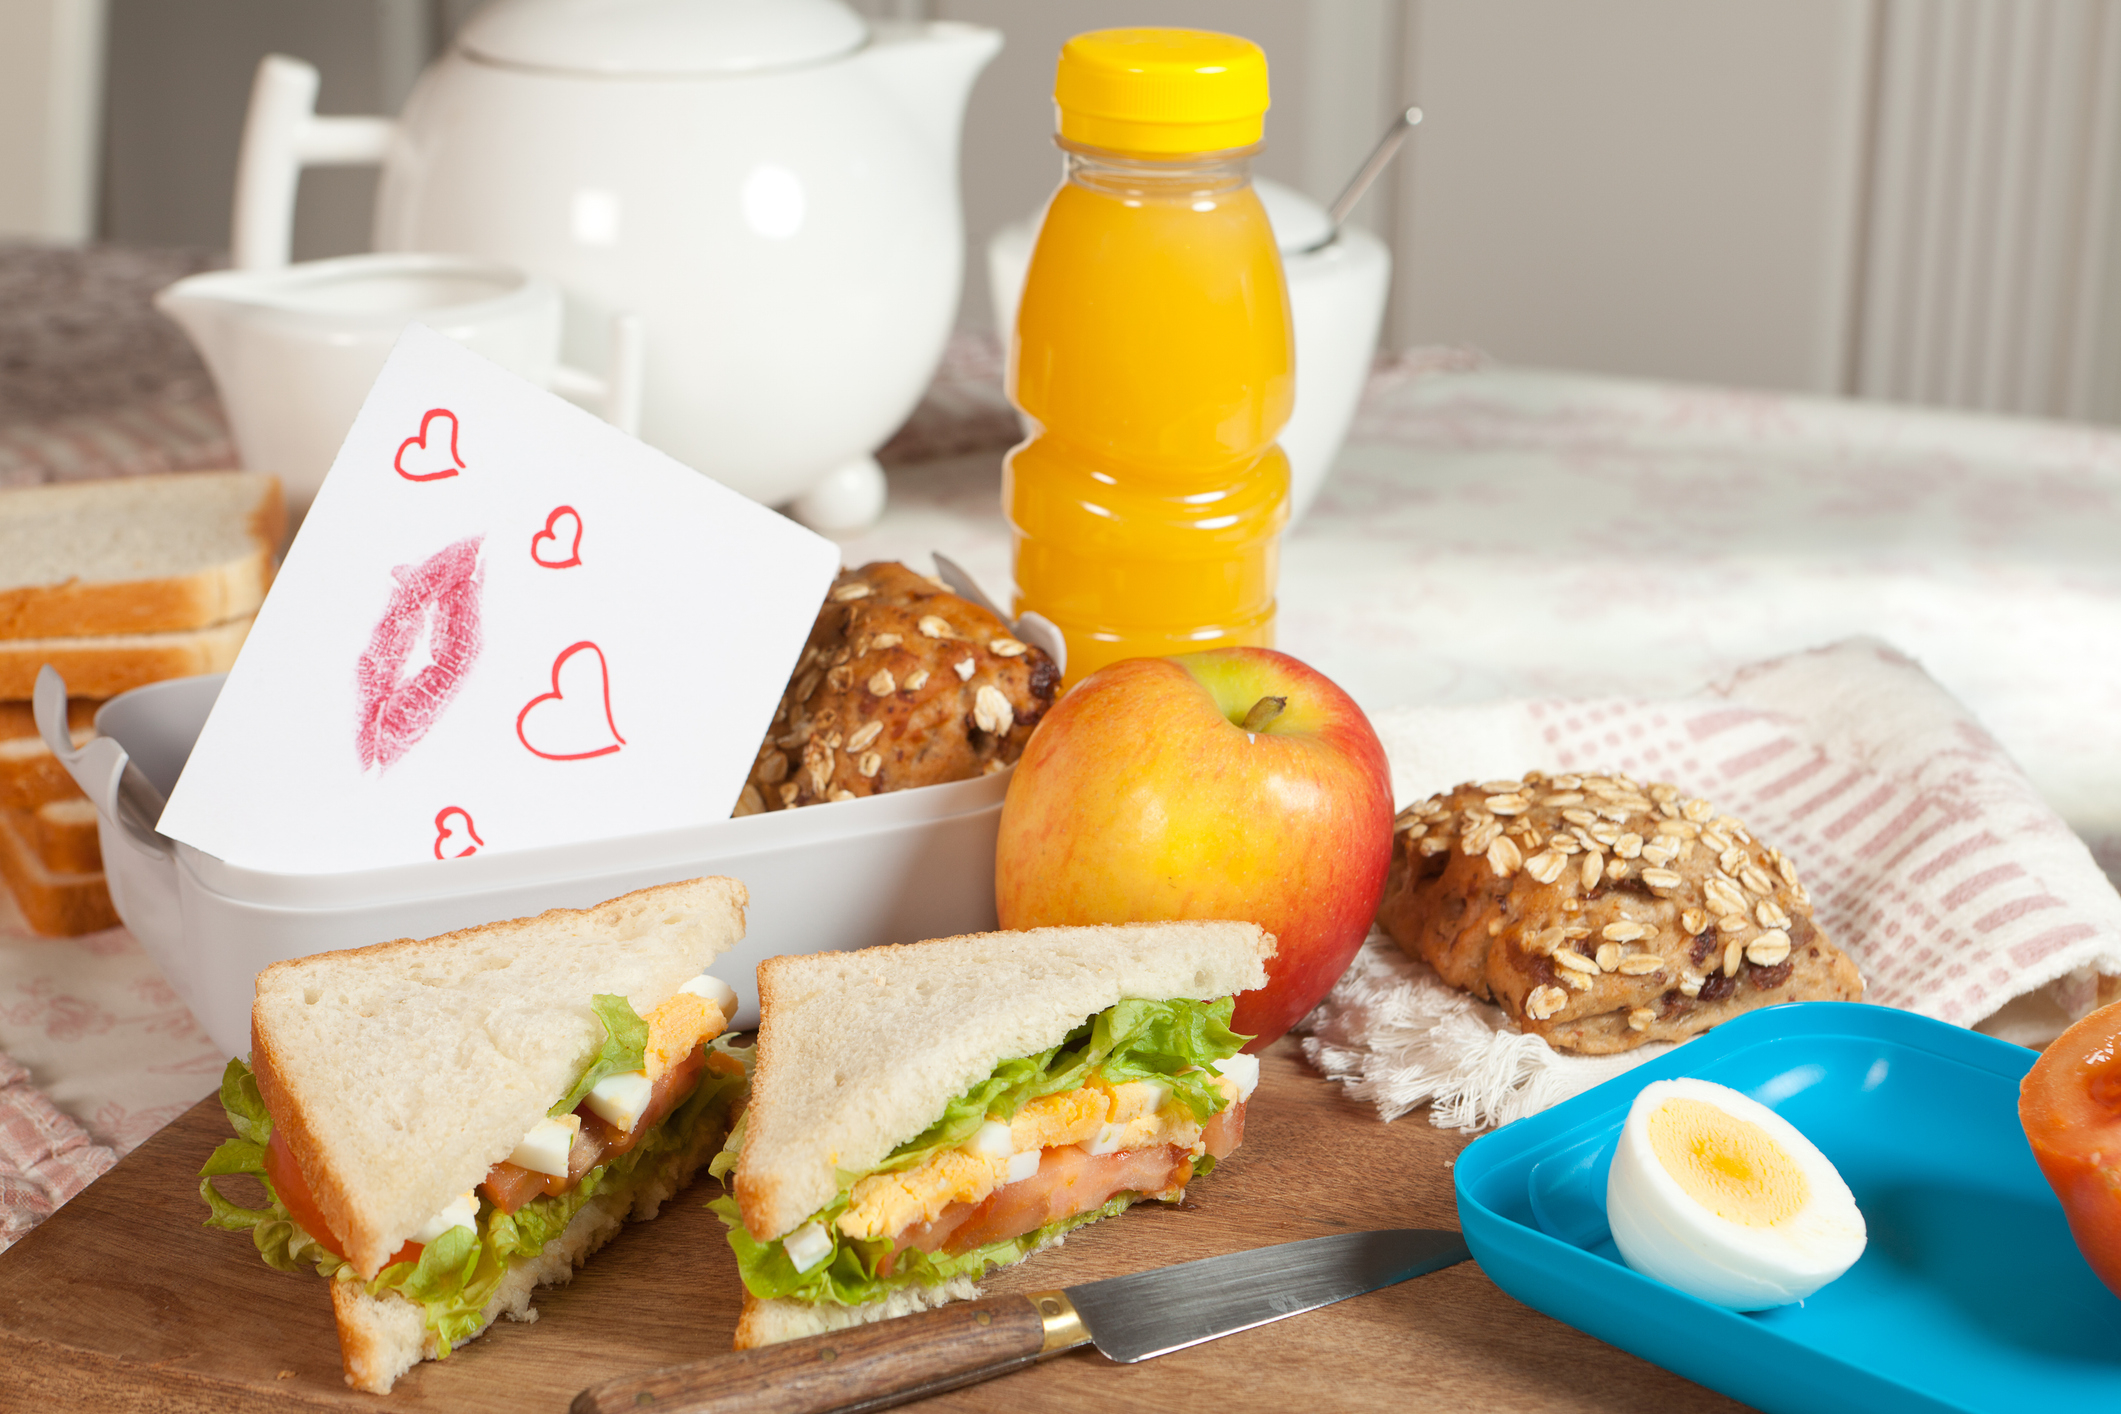 Healthy lunch spread with sandwiches, fruit, boiled egg, juice, and love note on the table